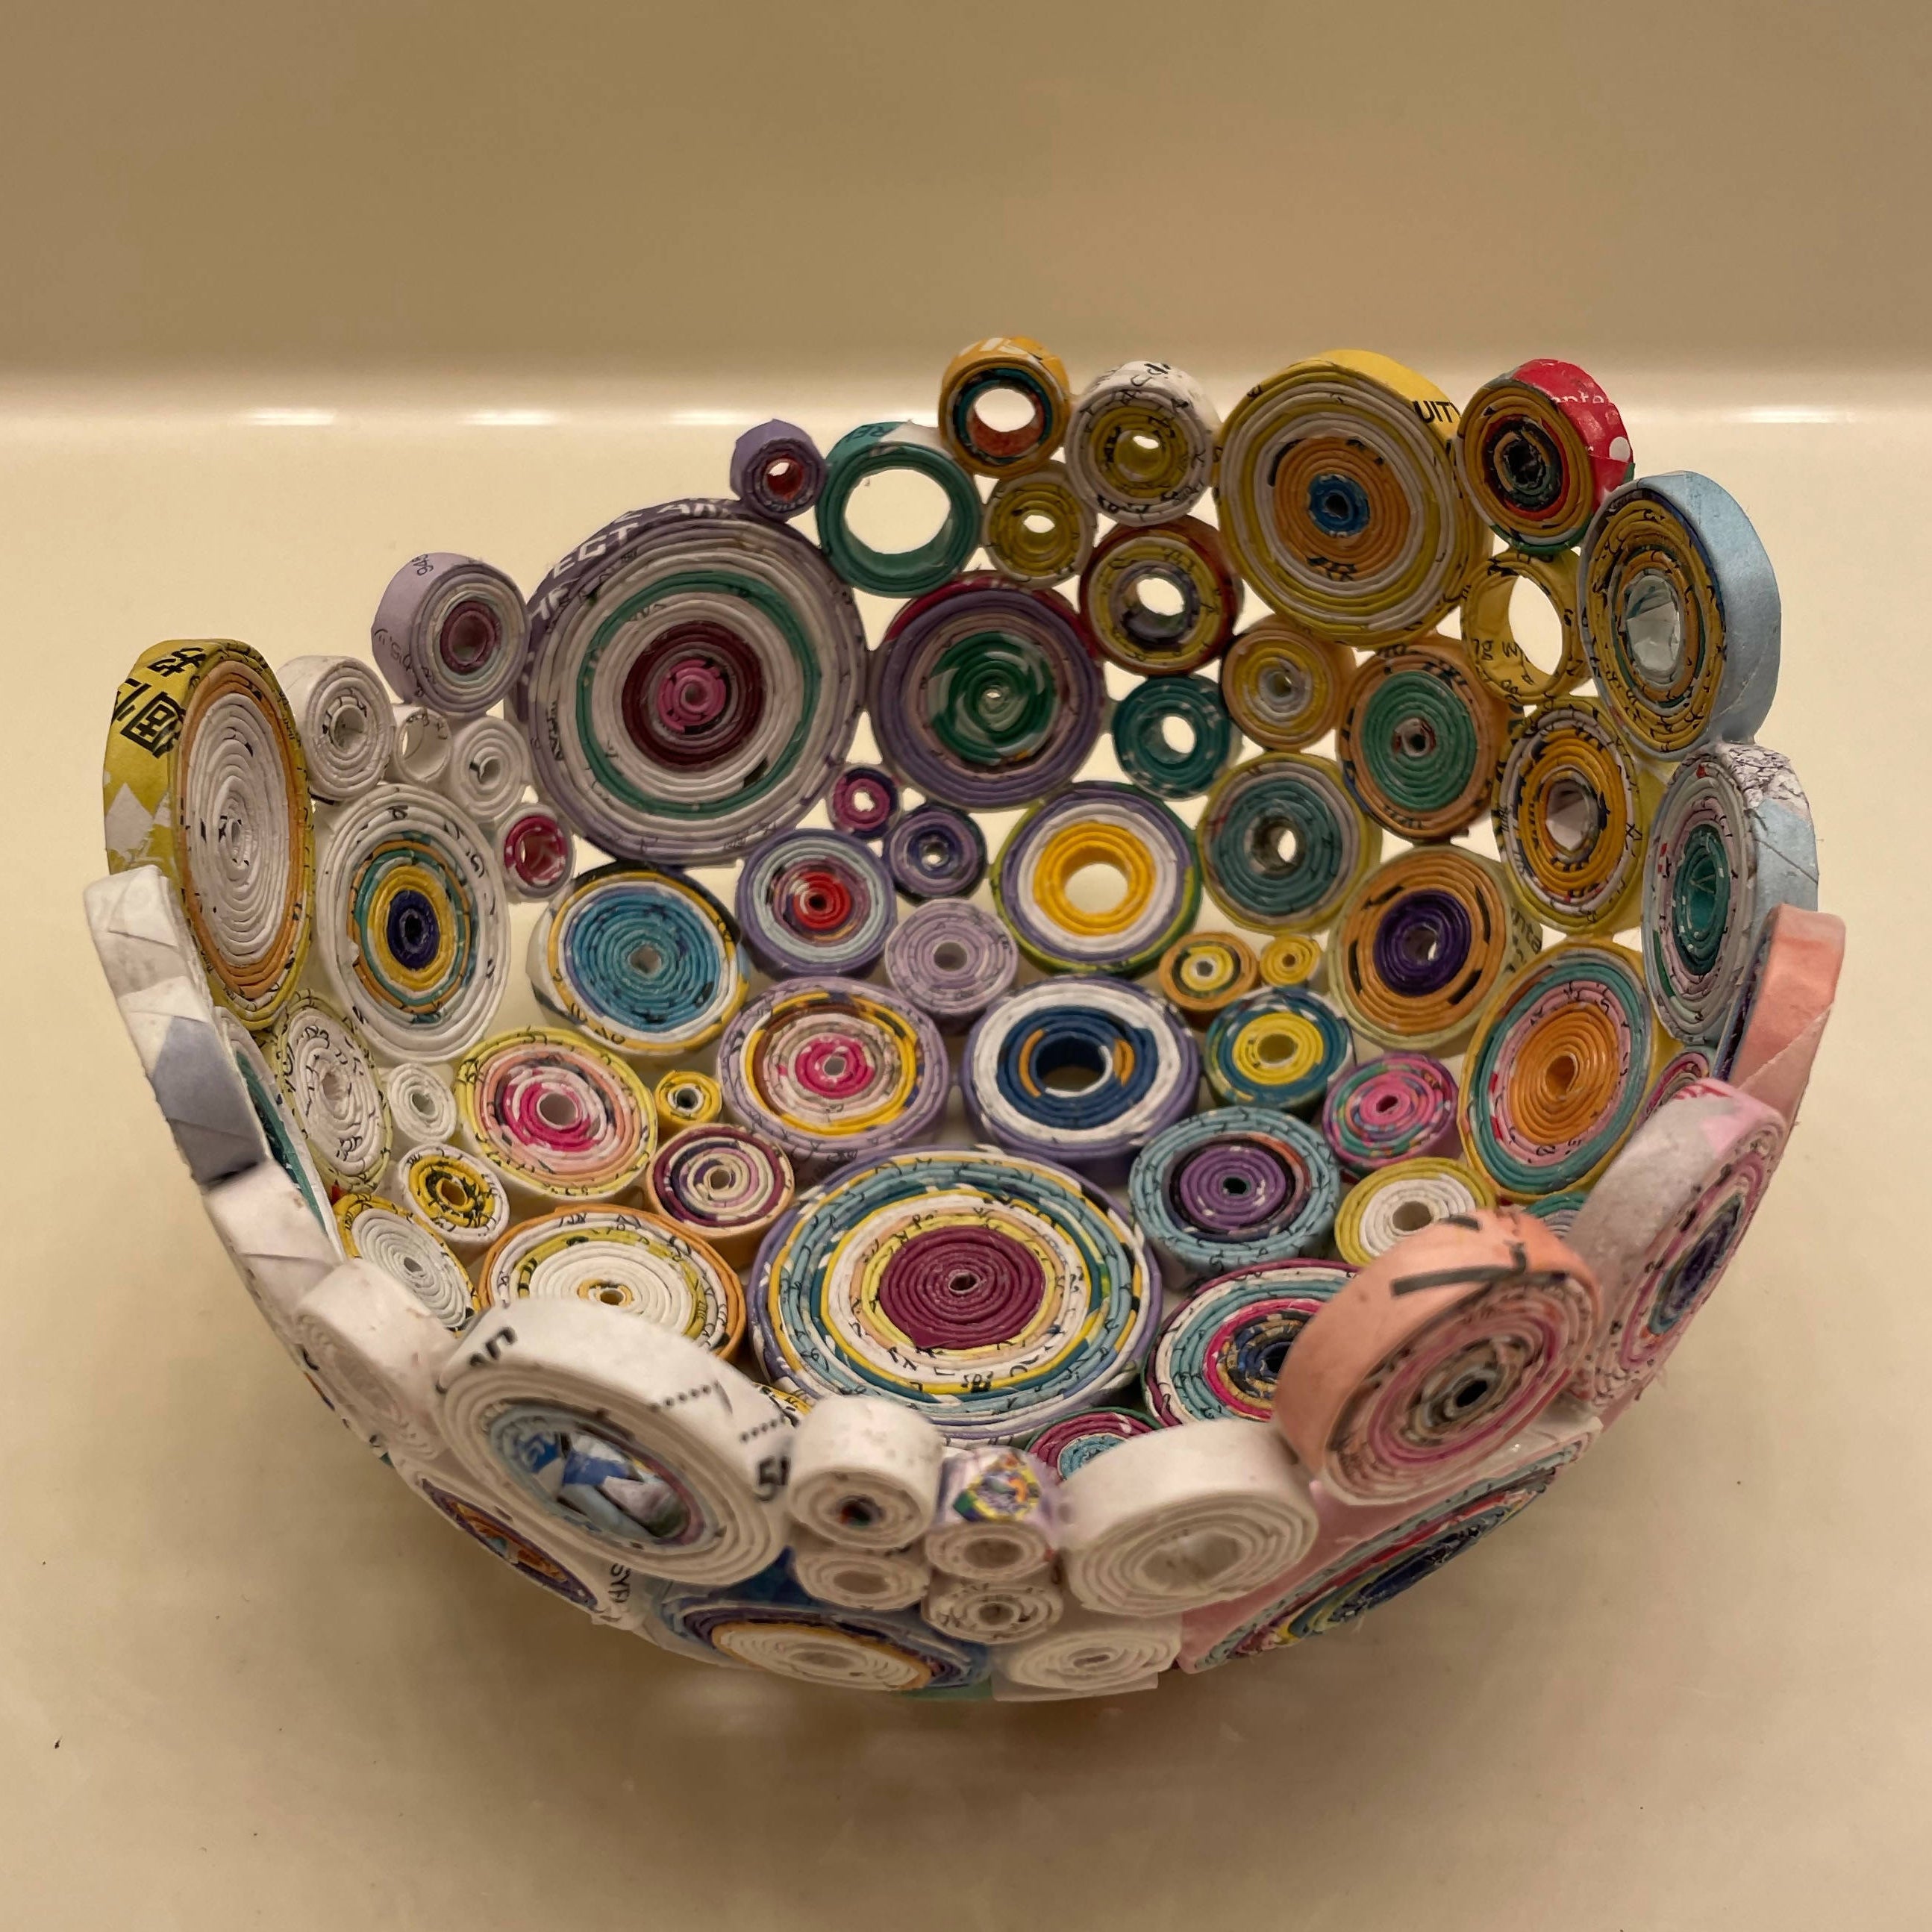 Coiled 8 Recycled Magazine Paper FOLK ART Bowl